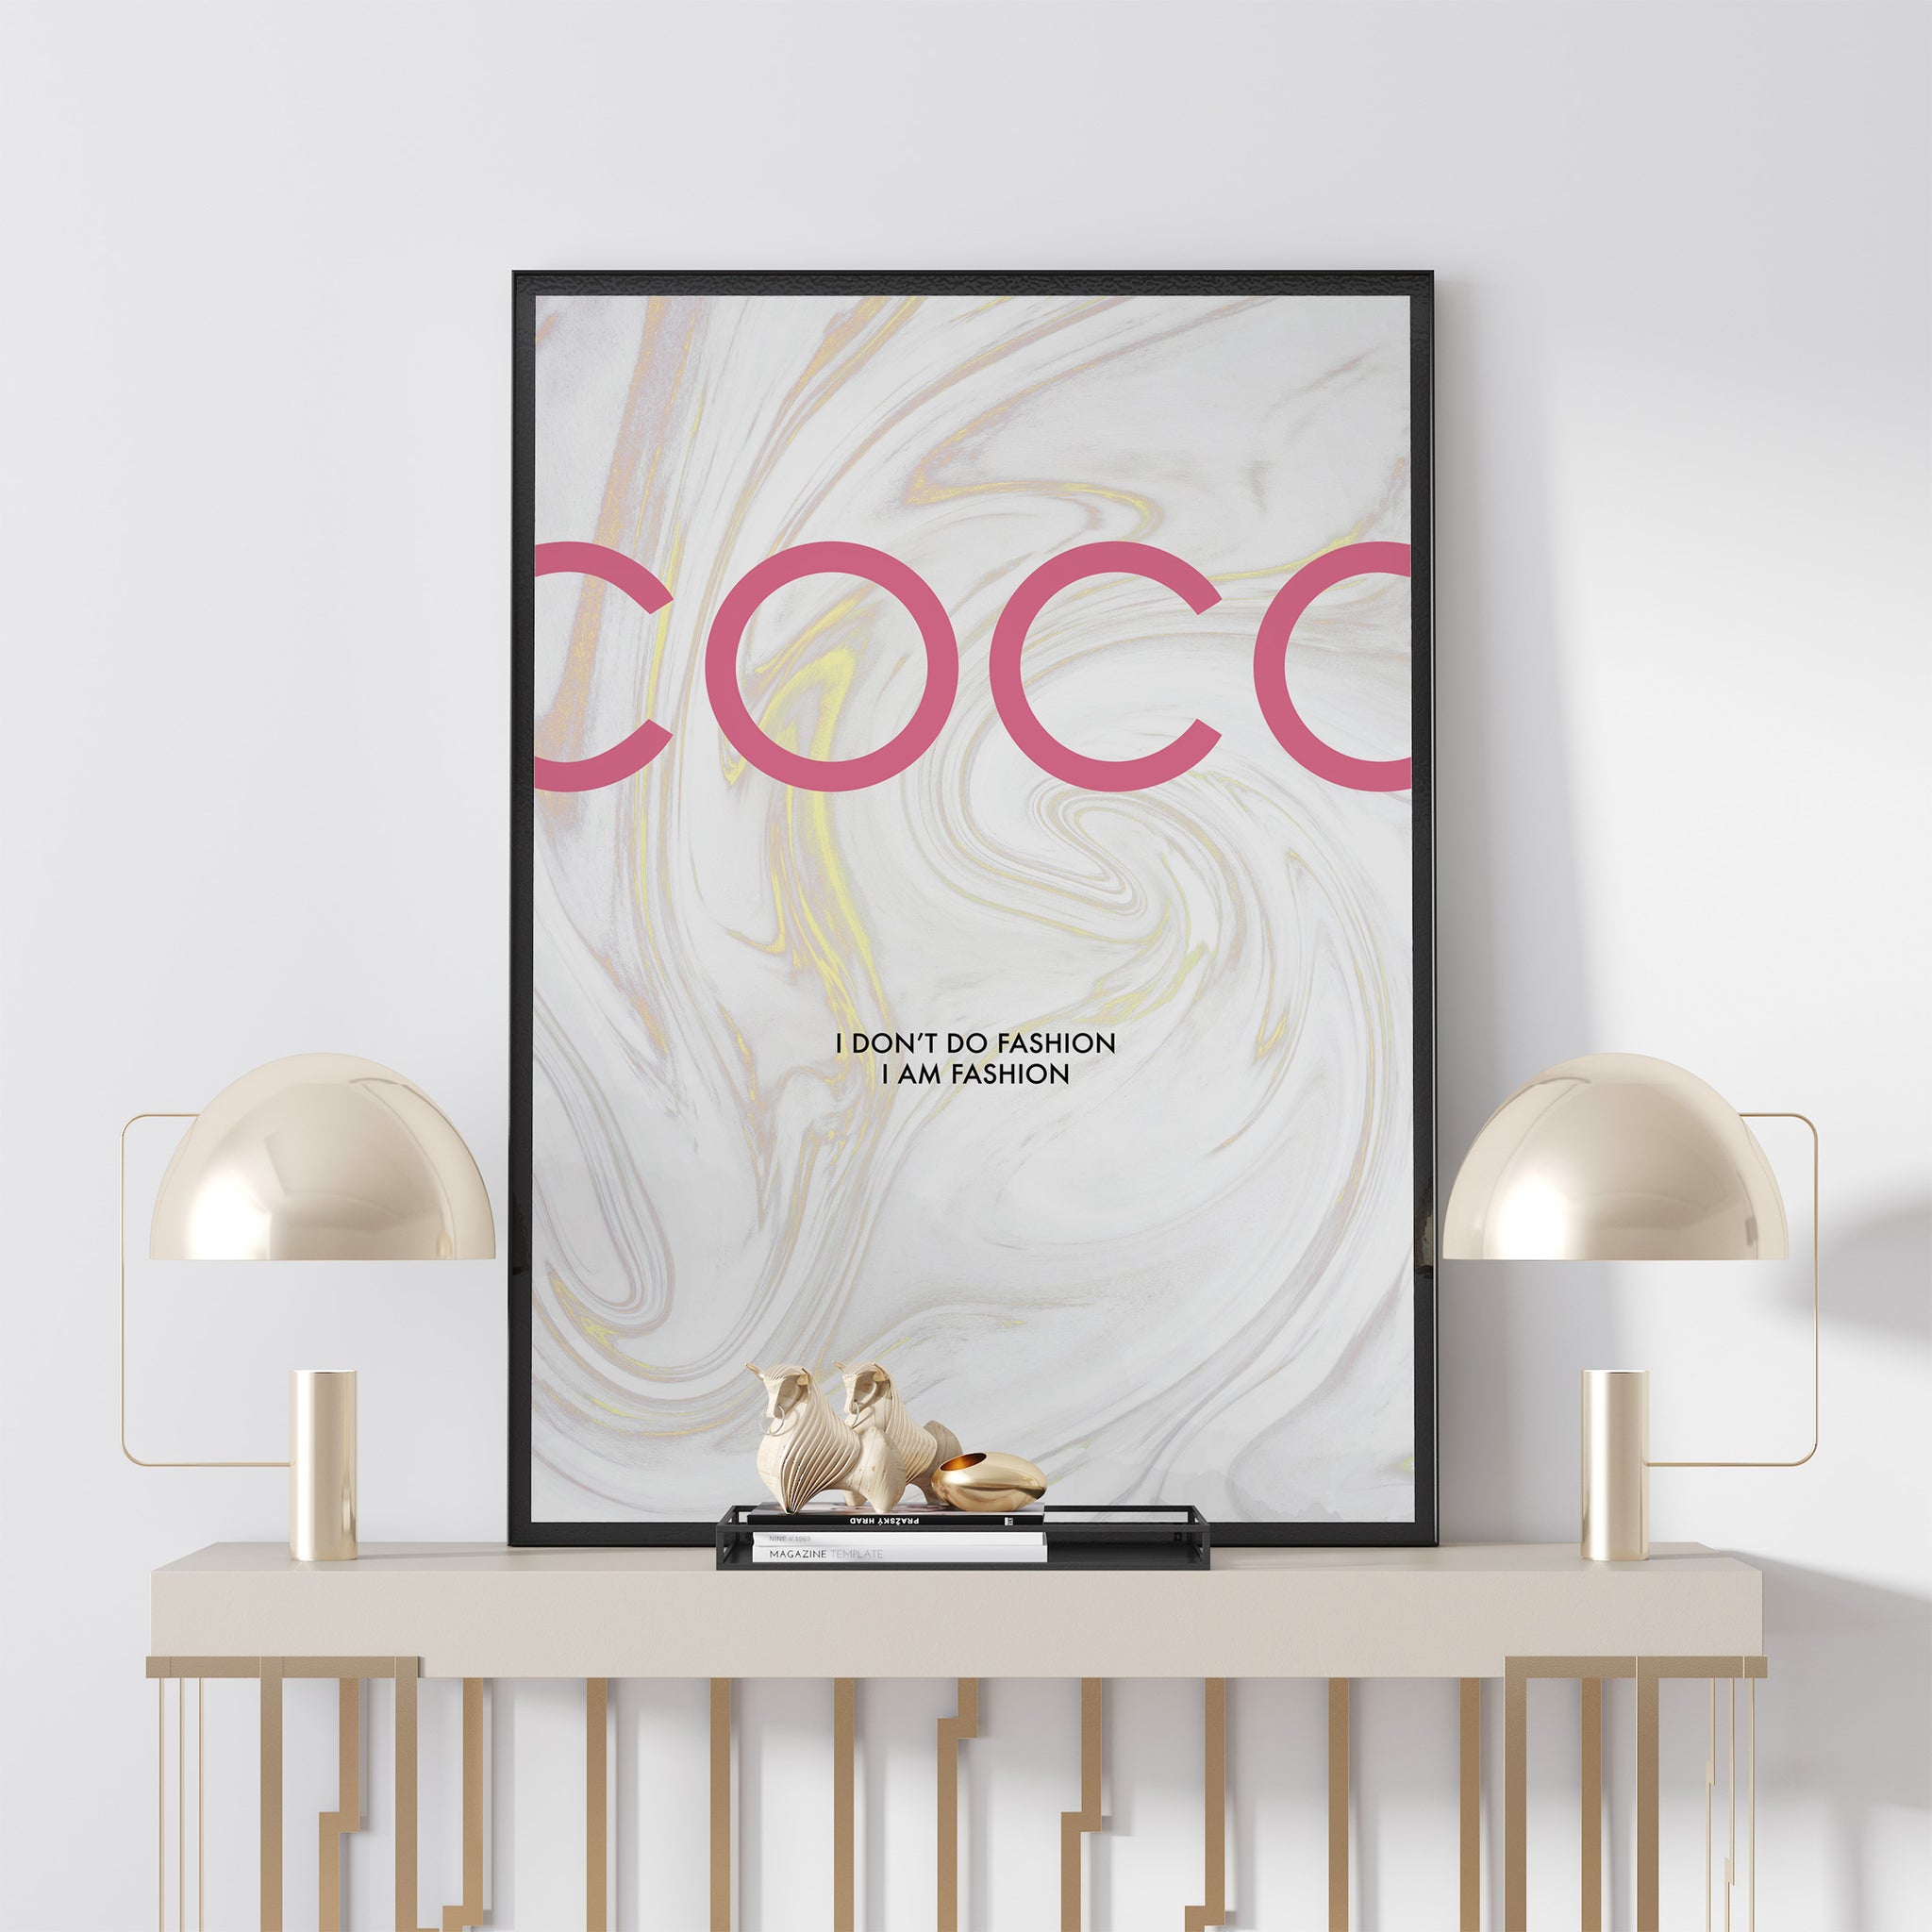 Classy & Fabulous | Coco Chanel Quote Wall Art | 11x14 UNFRAMED Black,  White, Pink Art Print | Contemporary, Positive, Inspirational, Famous  Quotes